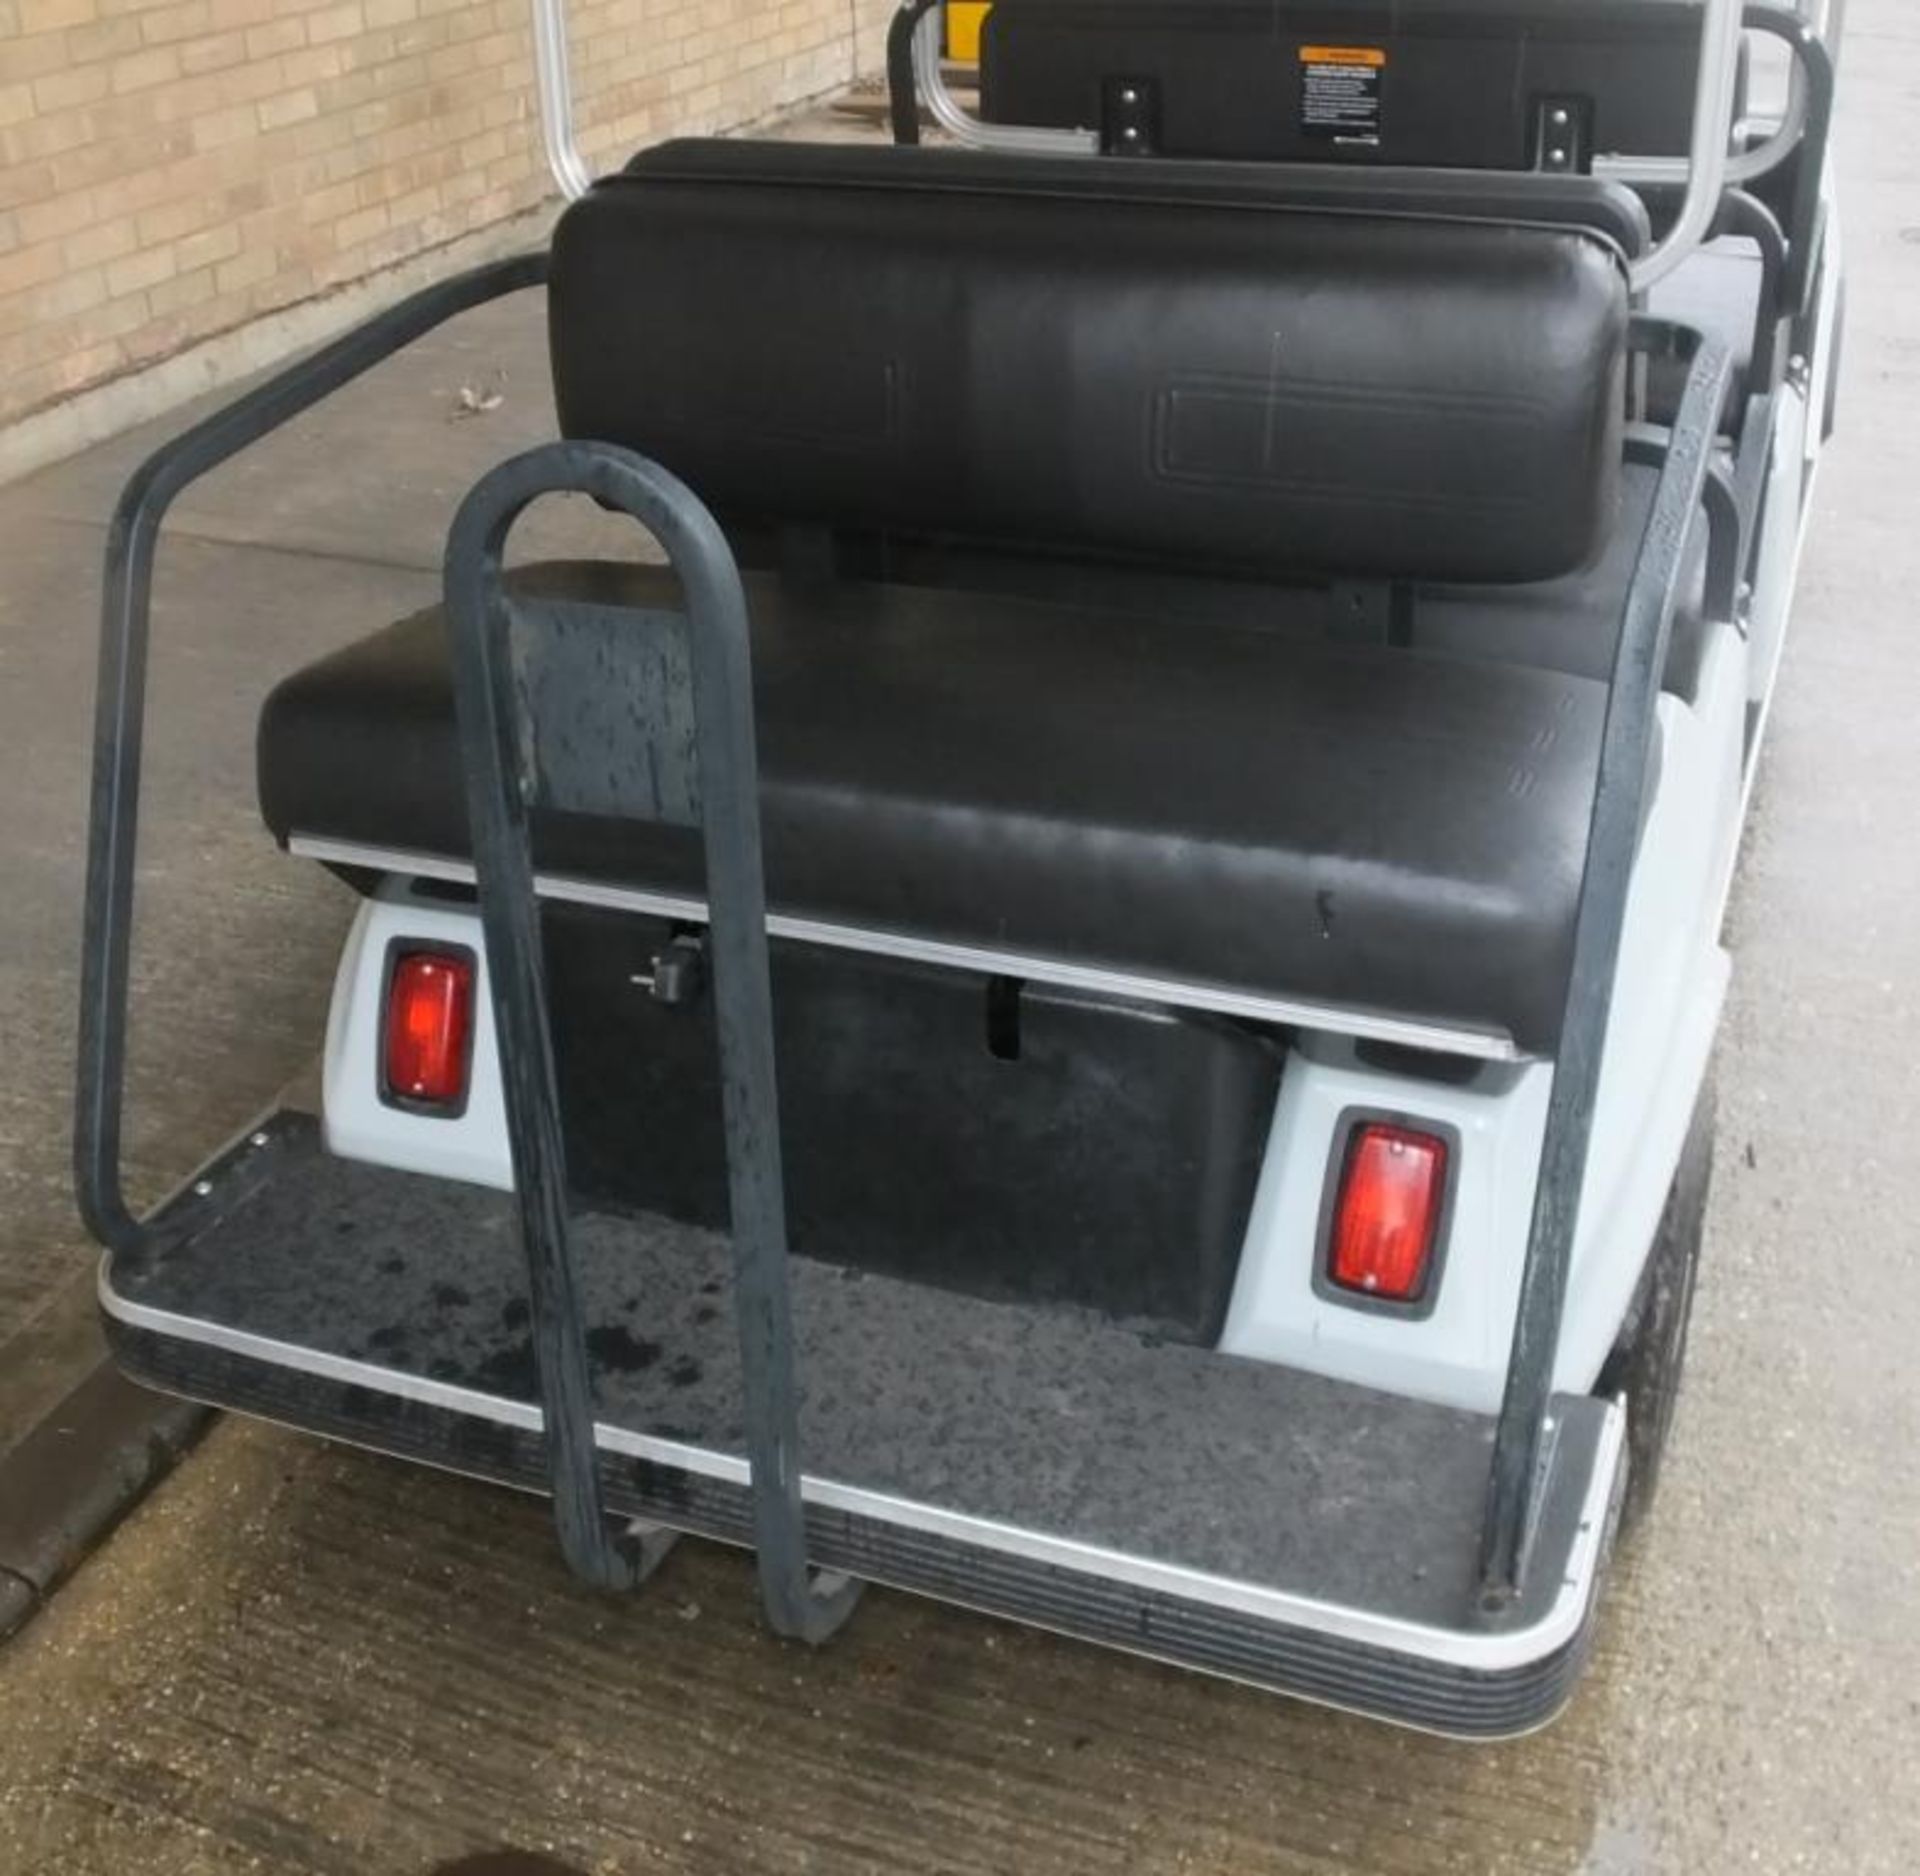 Ingersoll Rand Club Car Villager Electric grey - 6 seater - QuiQ - Image 3 of 9